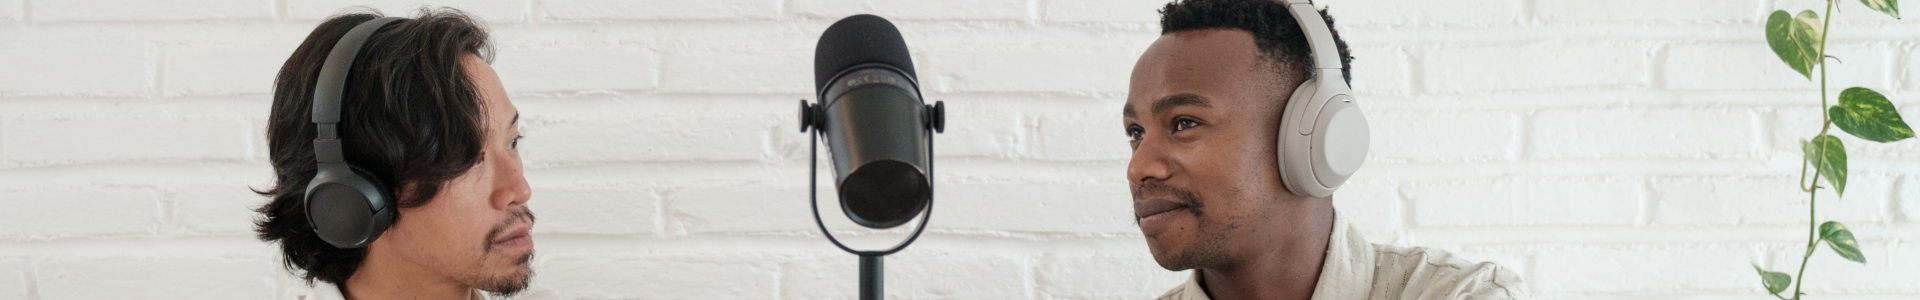 Is Podcasting the New Blogging? A Comparative Exploration